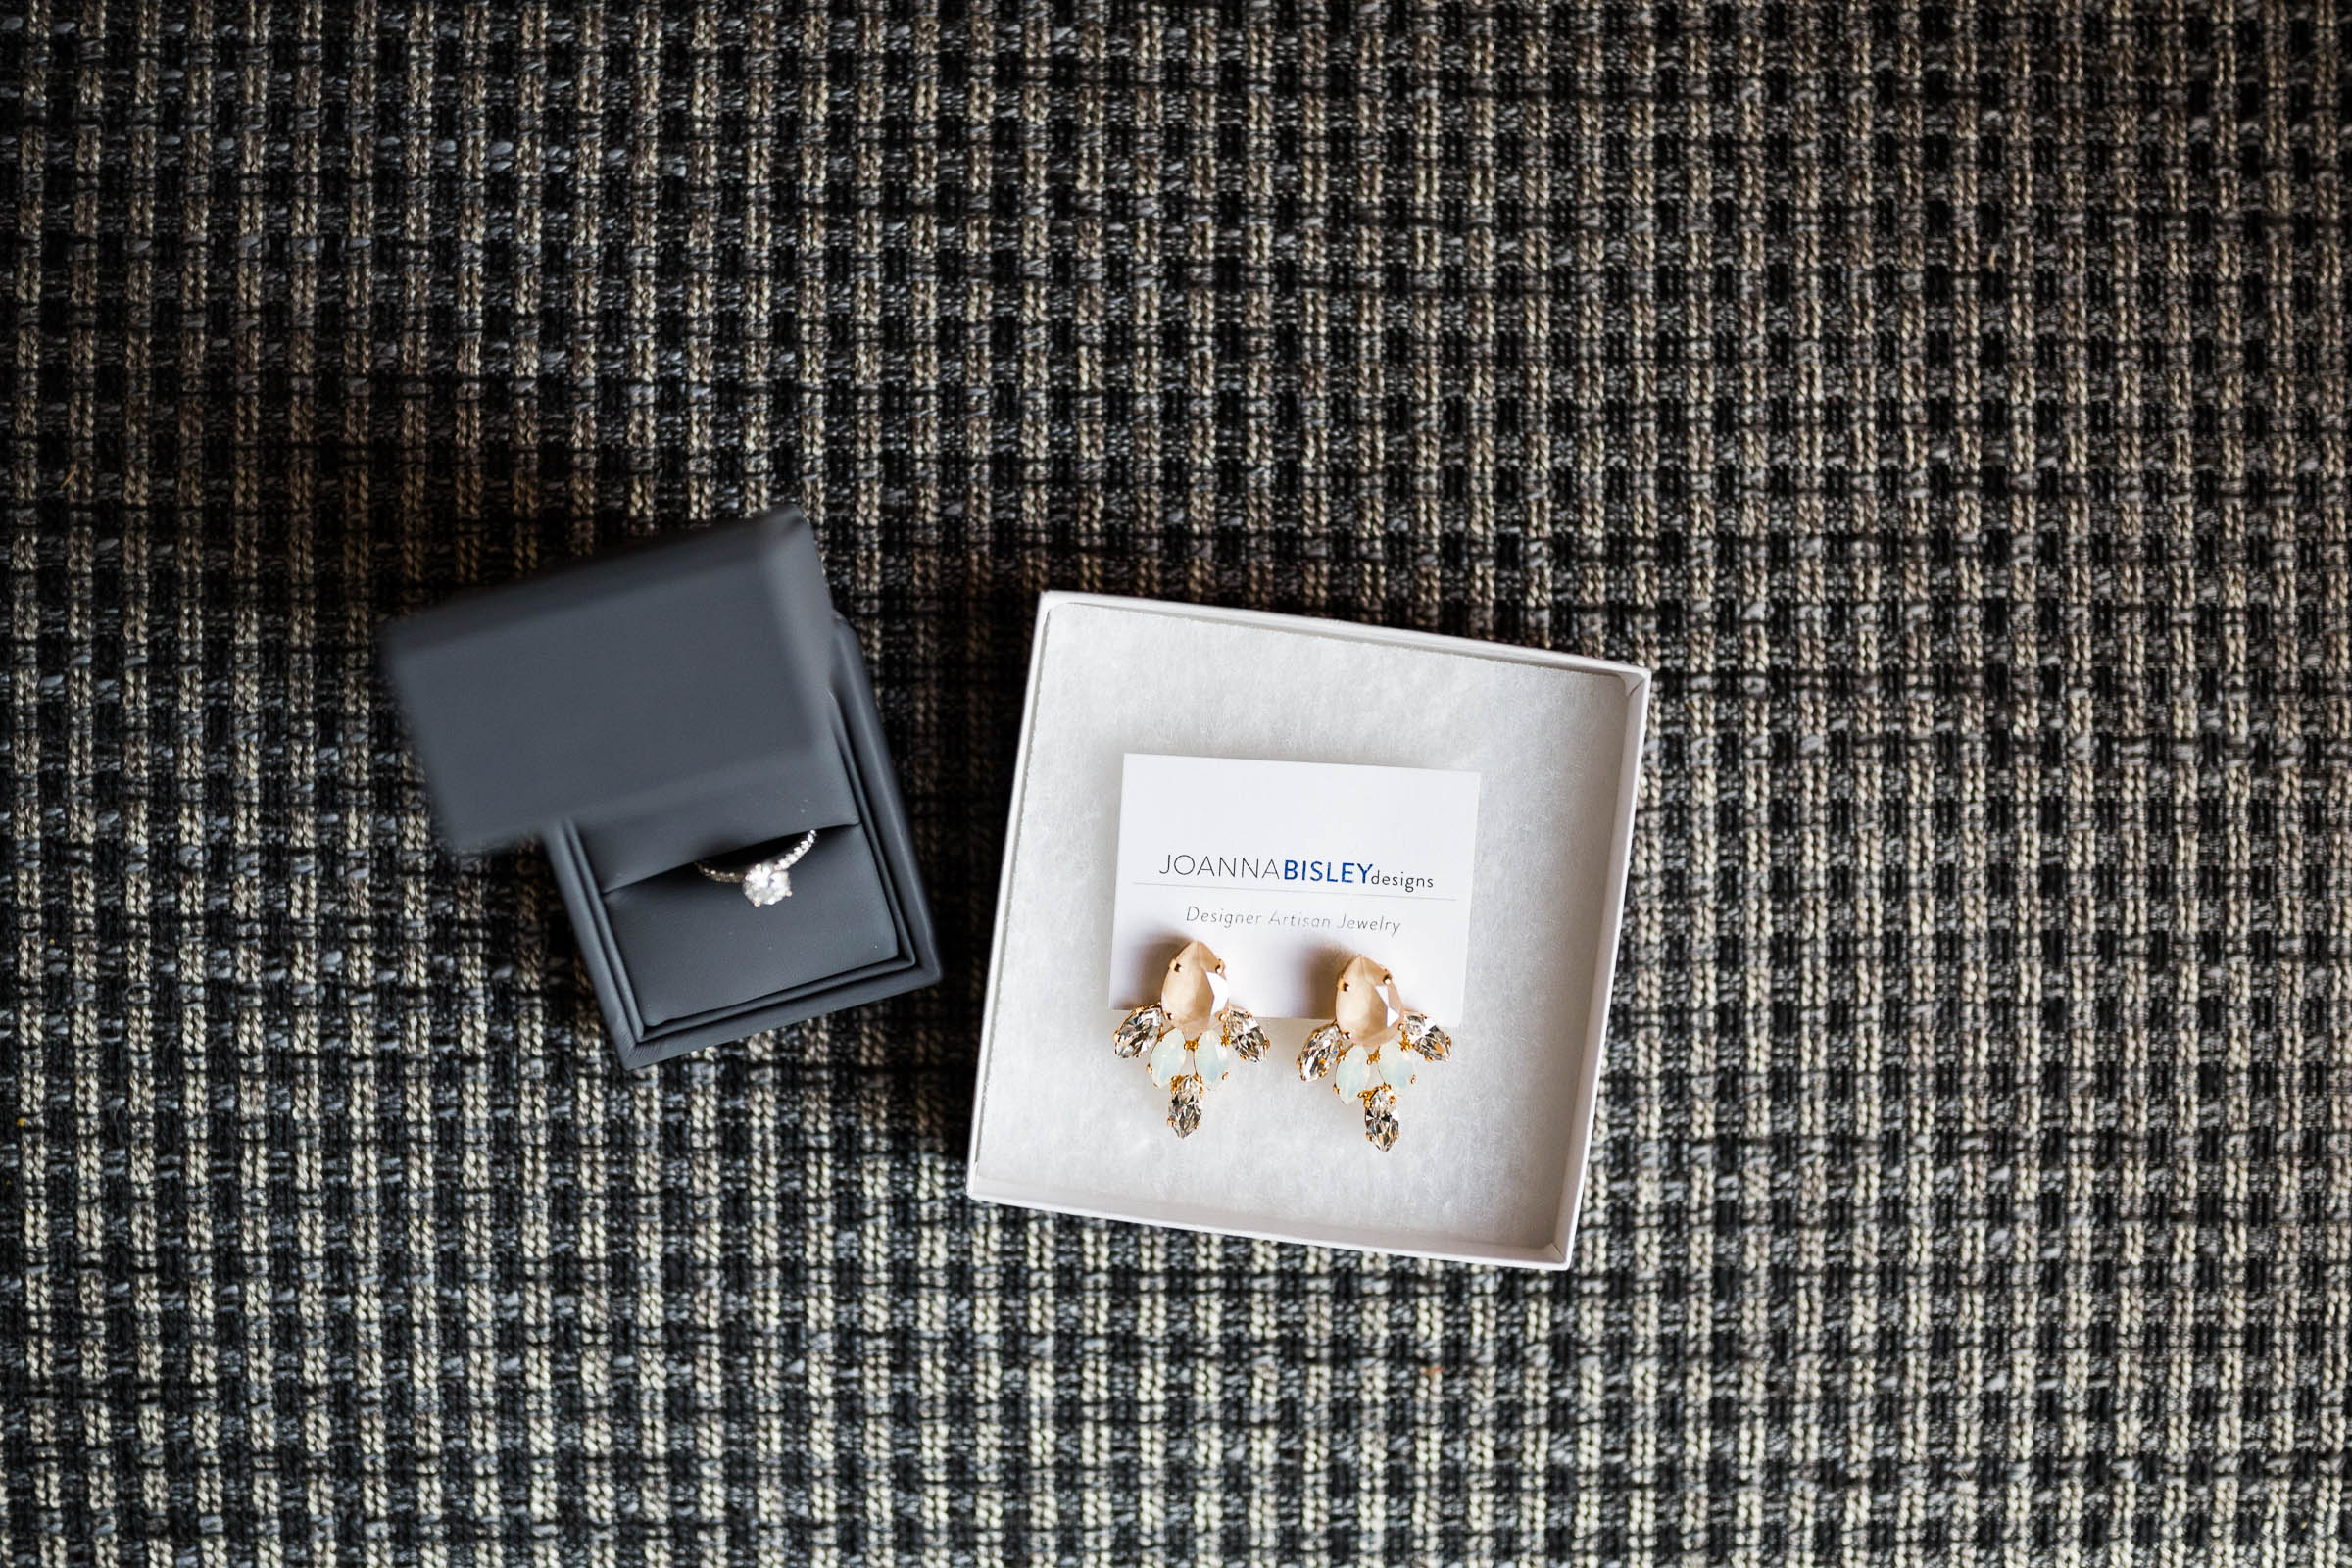 Wedding ring and wedding earrings in boxes against checked backdrop